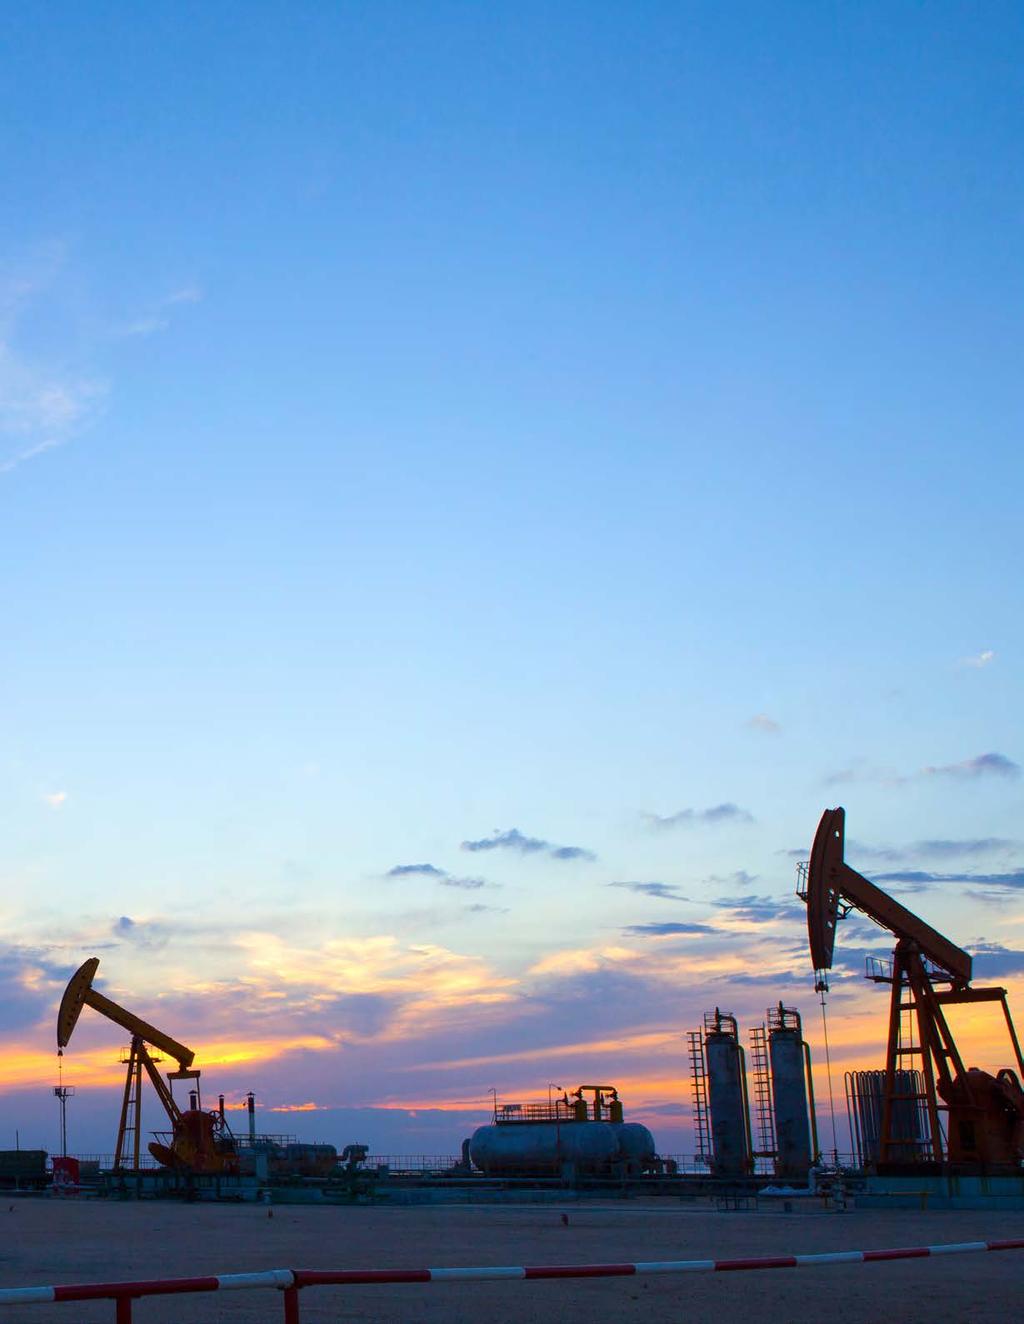 EY Energy Executive Insight: Energy companies responded to the 2014 collapse of crude prices by pulling all the traditional levers that enable them to reduce costs and adjust to market conditions.